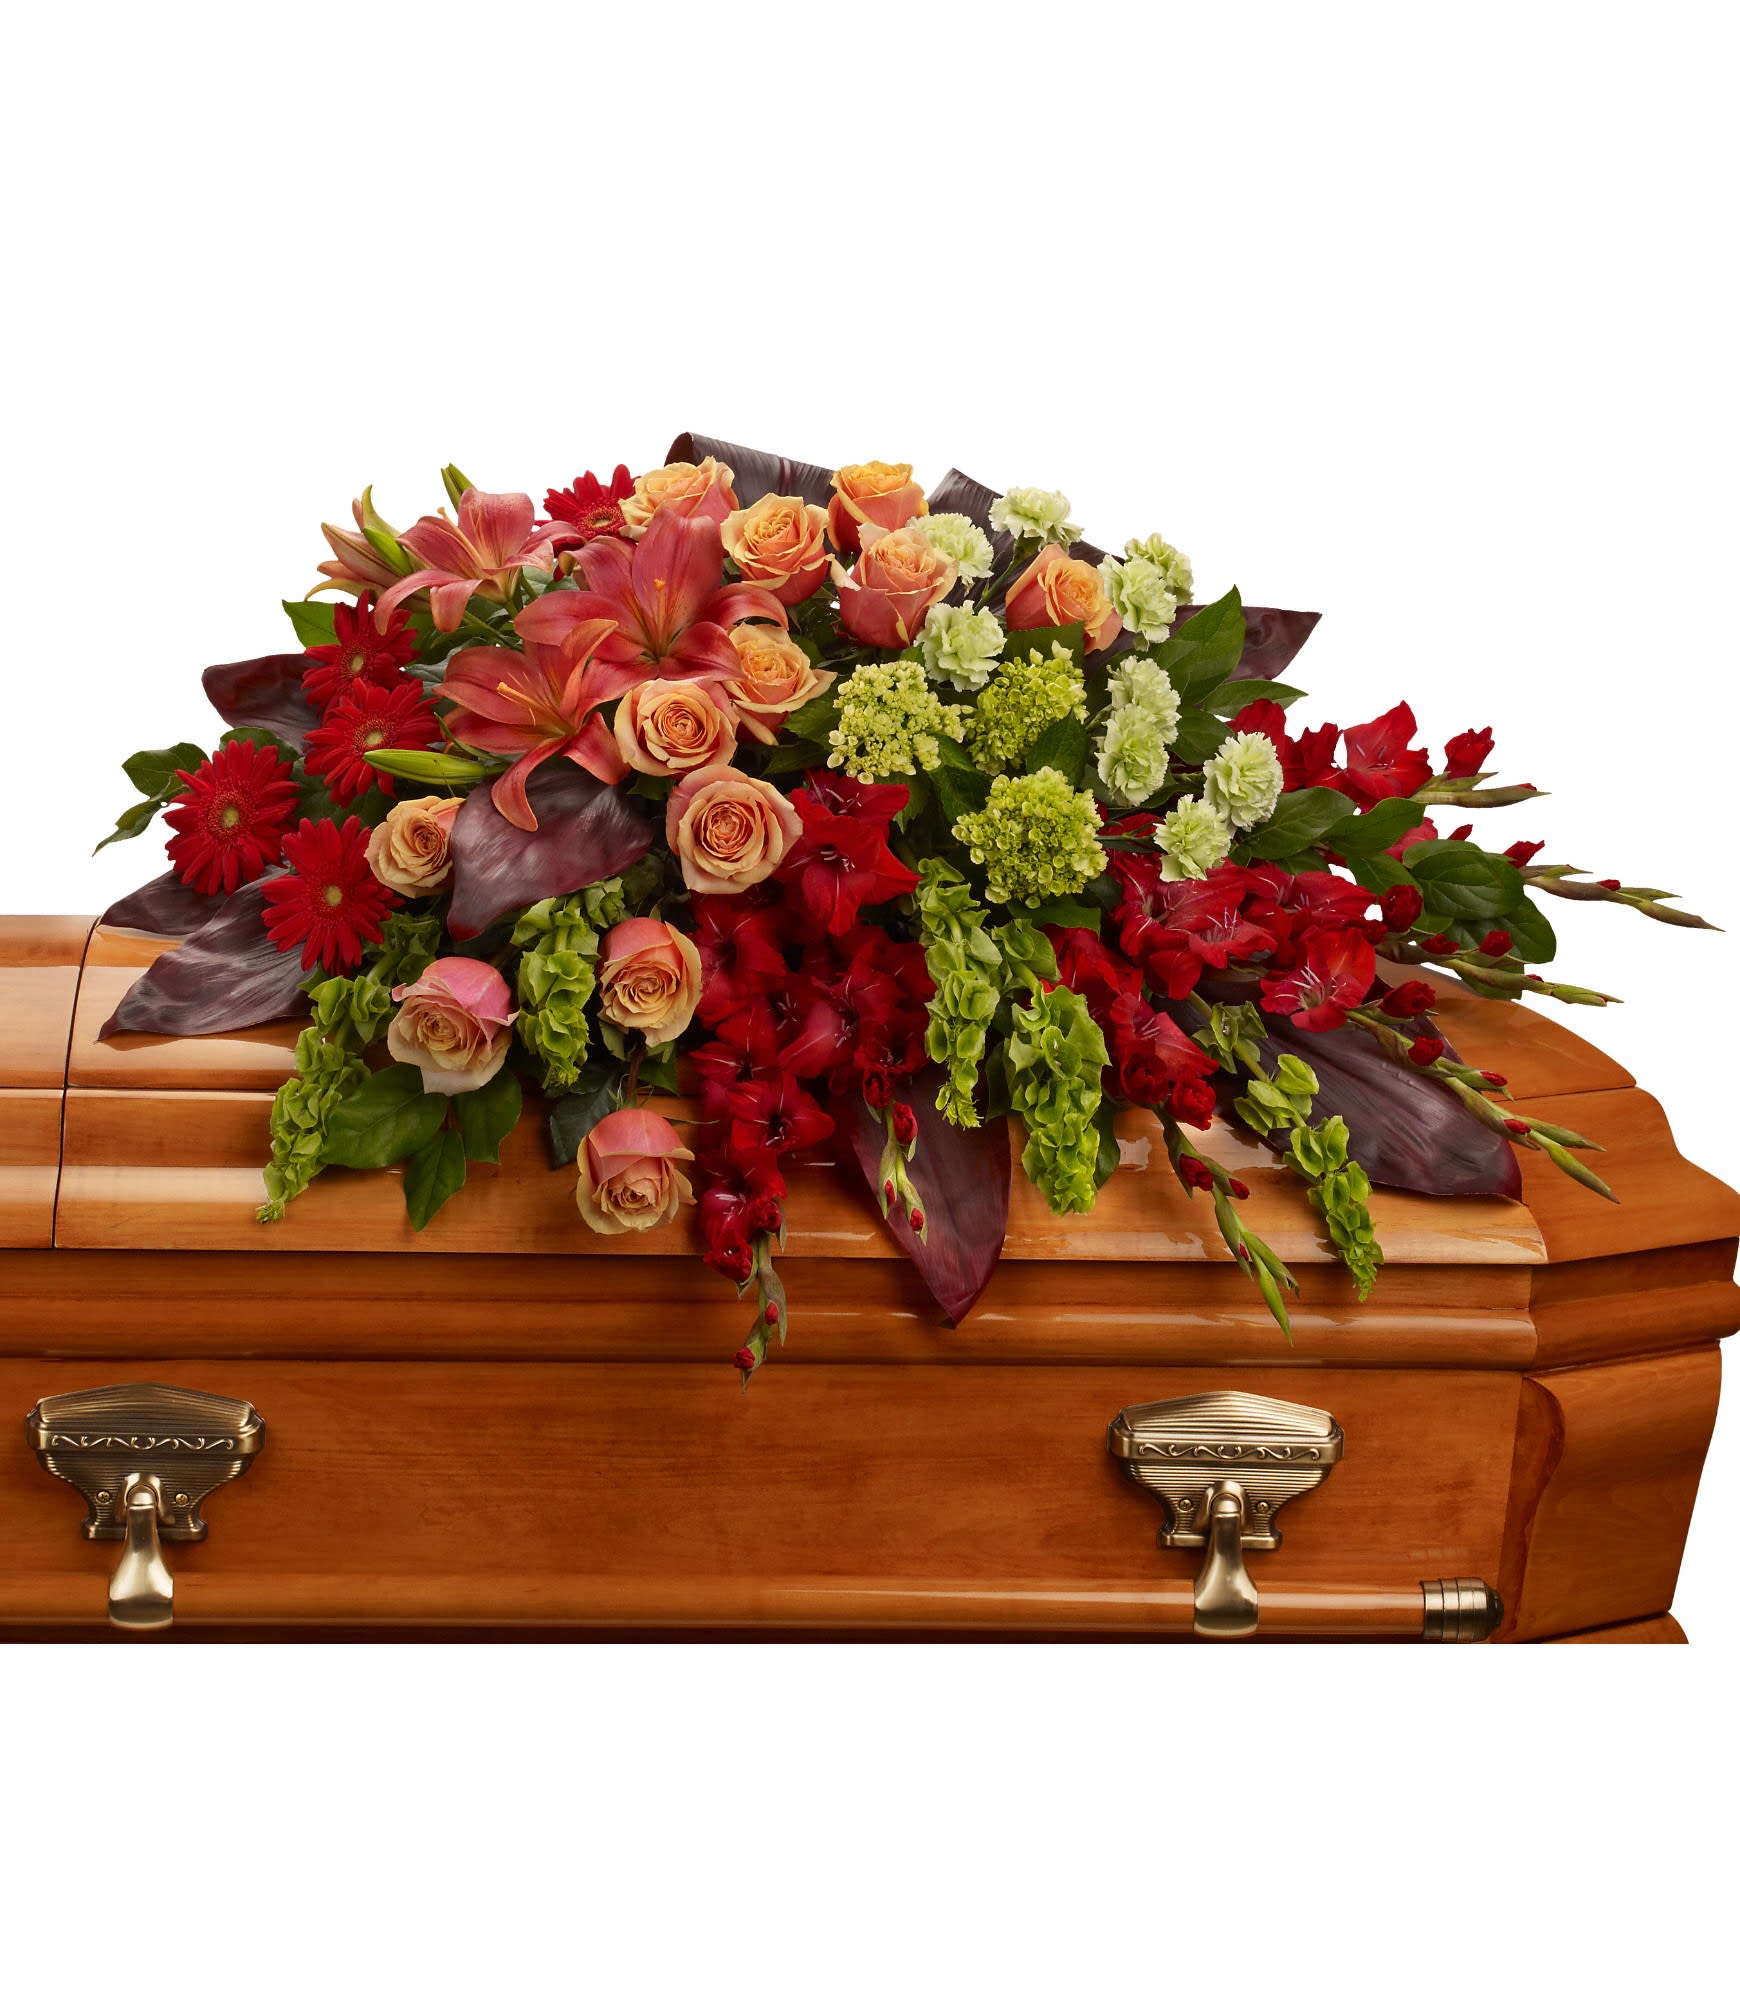 A Fond Farewell Casket Spray by Teleflora - An overflowing of love and respect is joyfully expressed in this truly magnificent casket spray of orange roses and lilies and other brilliant blooms. 